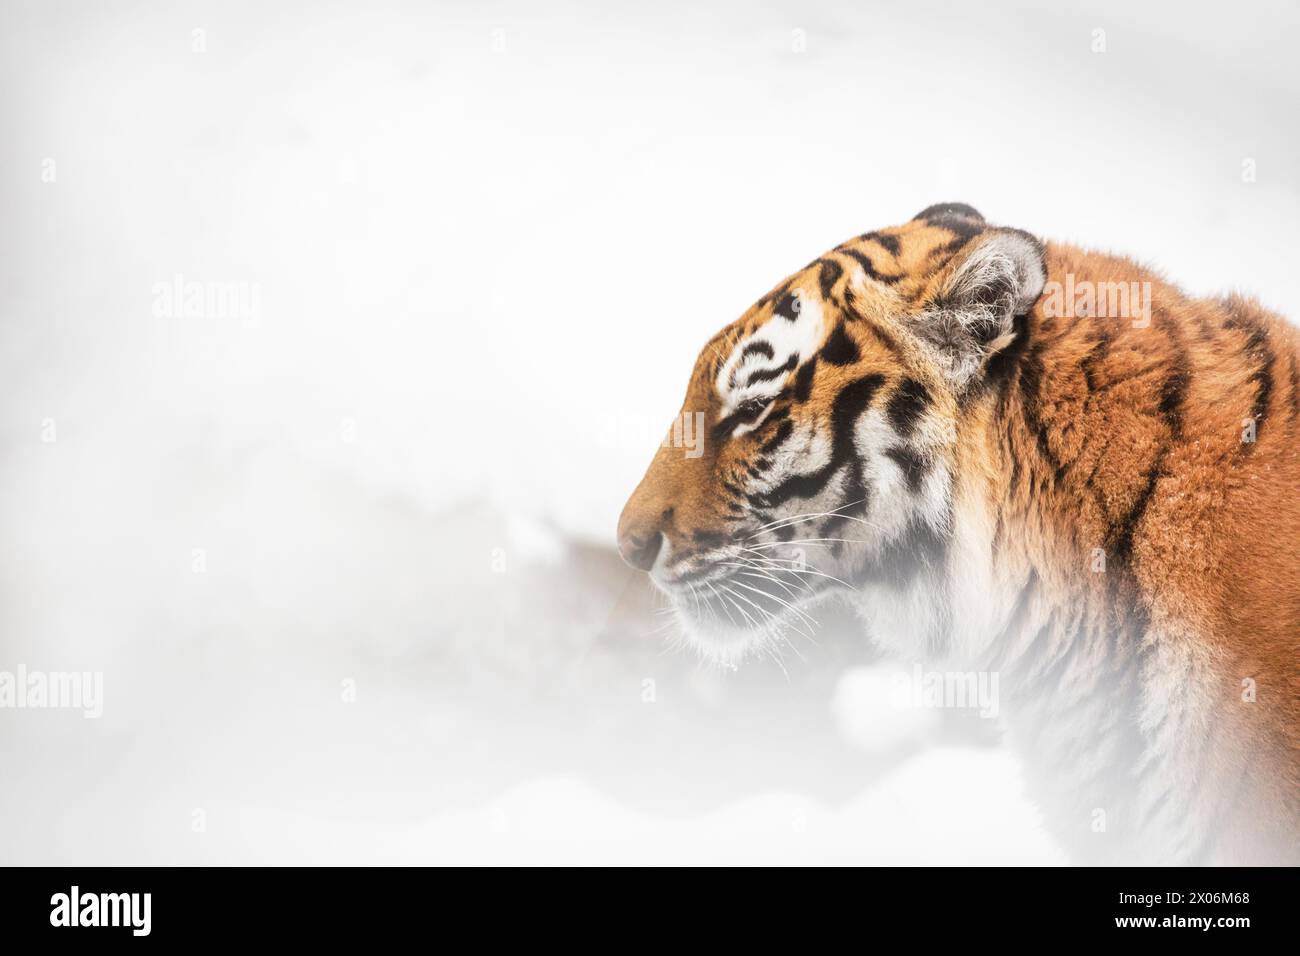 Siberian tiger, Amurian tiger (Panthera tigris altaica), Portrait in the snow, side view Stock Photo